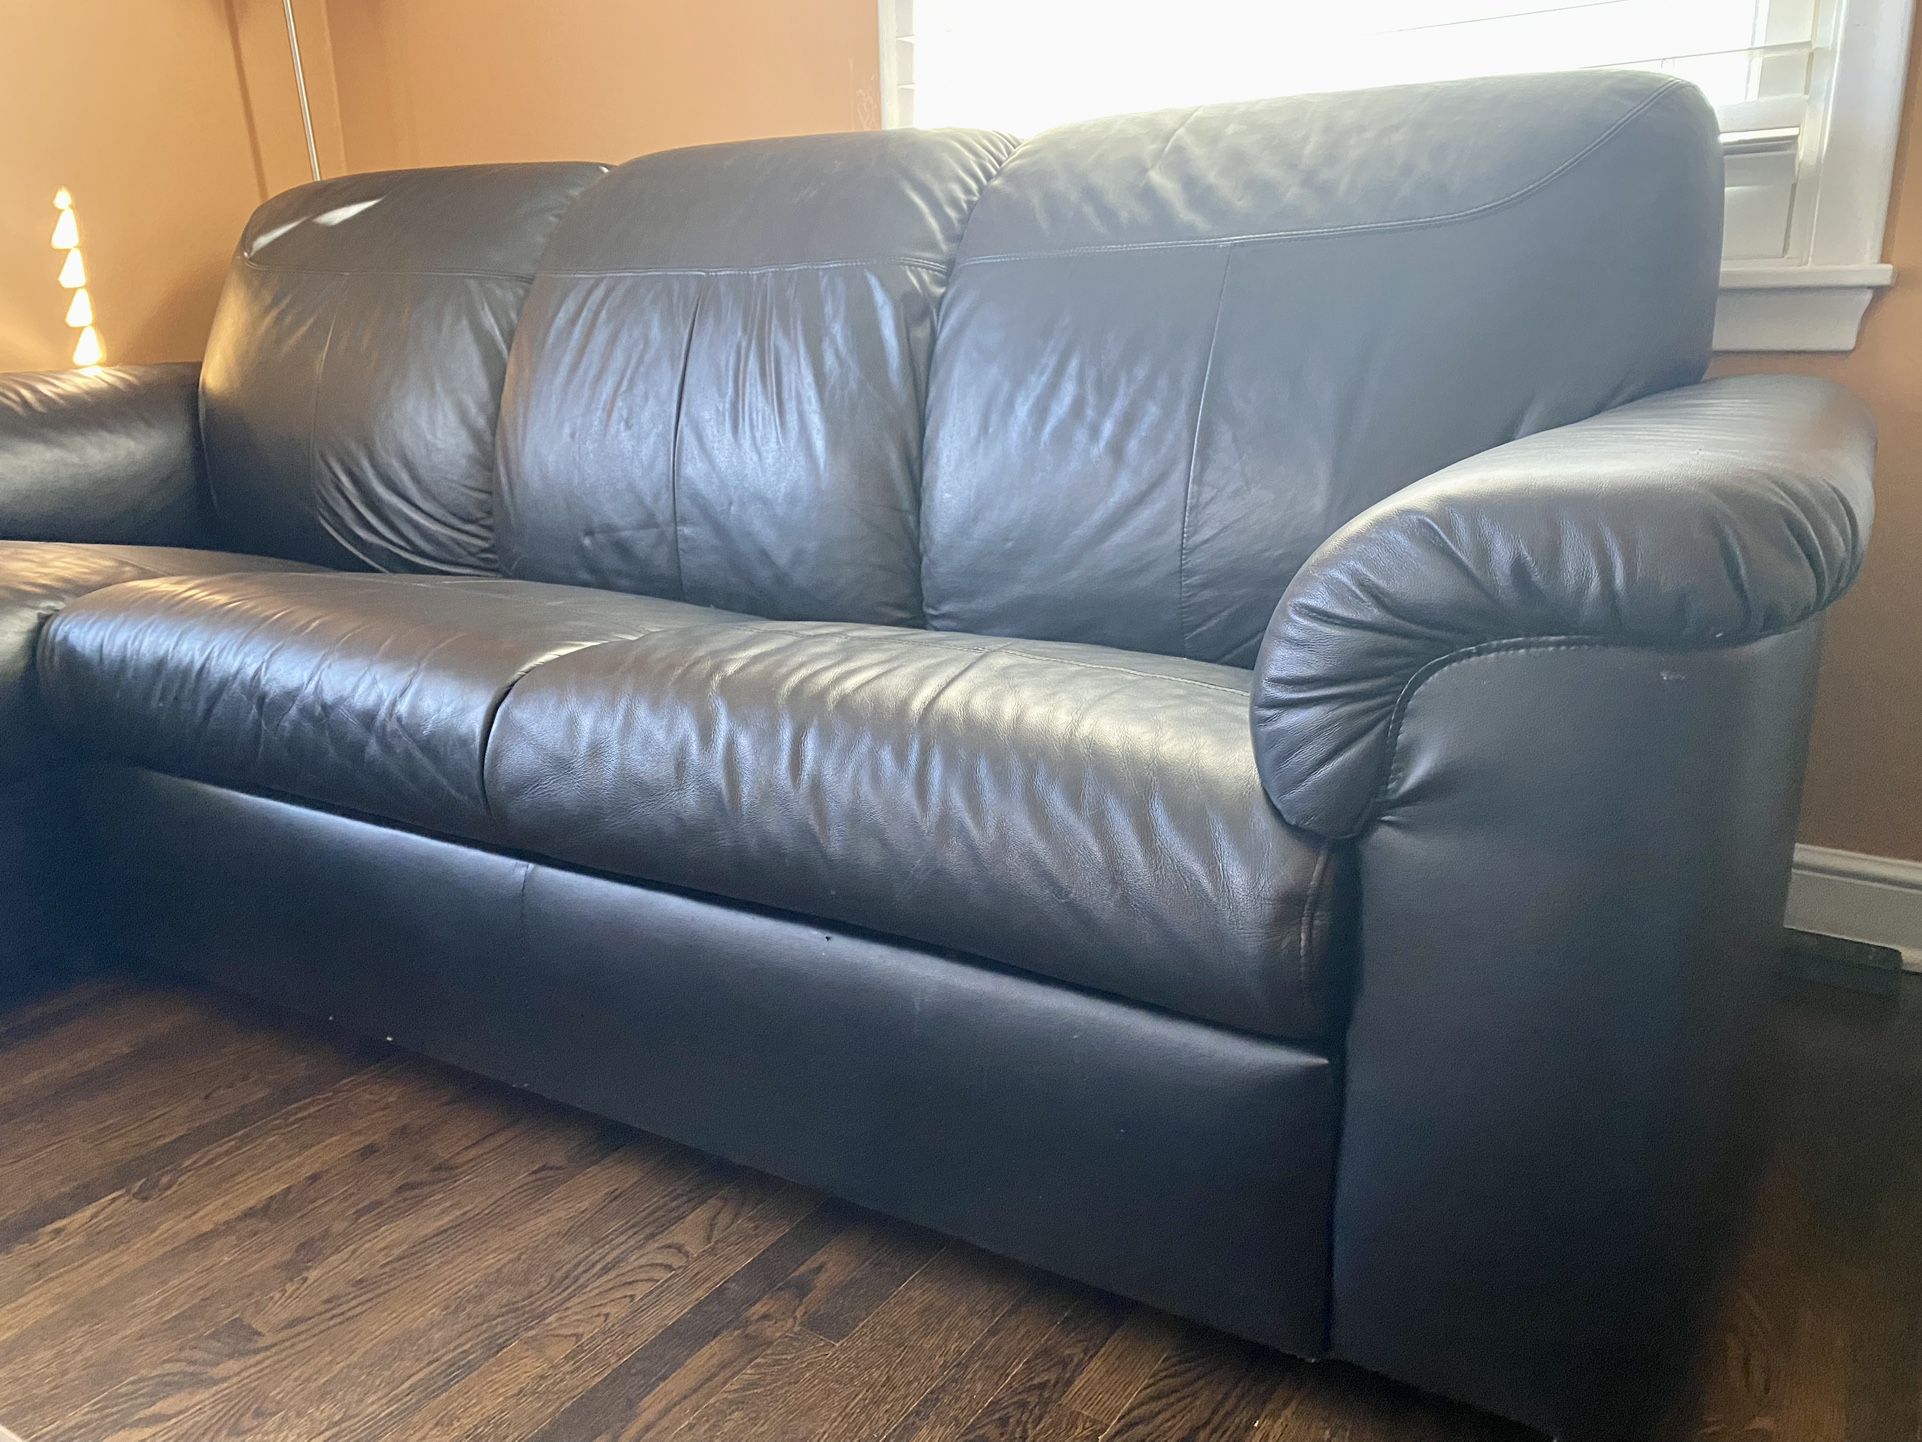 IKEA Timsfors Black Leather Sectional/Couch